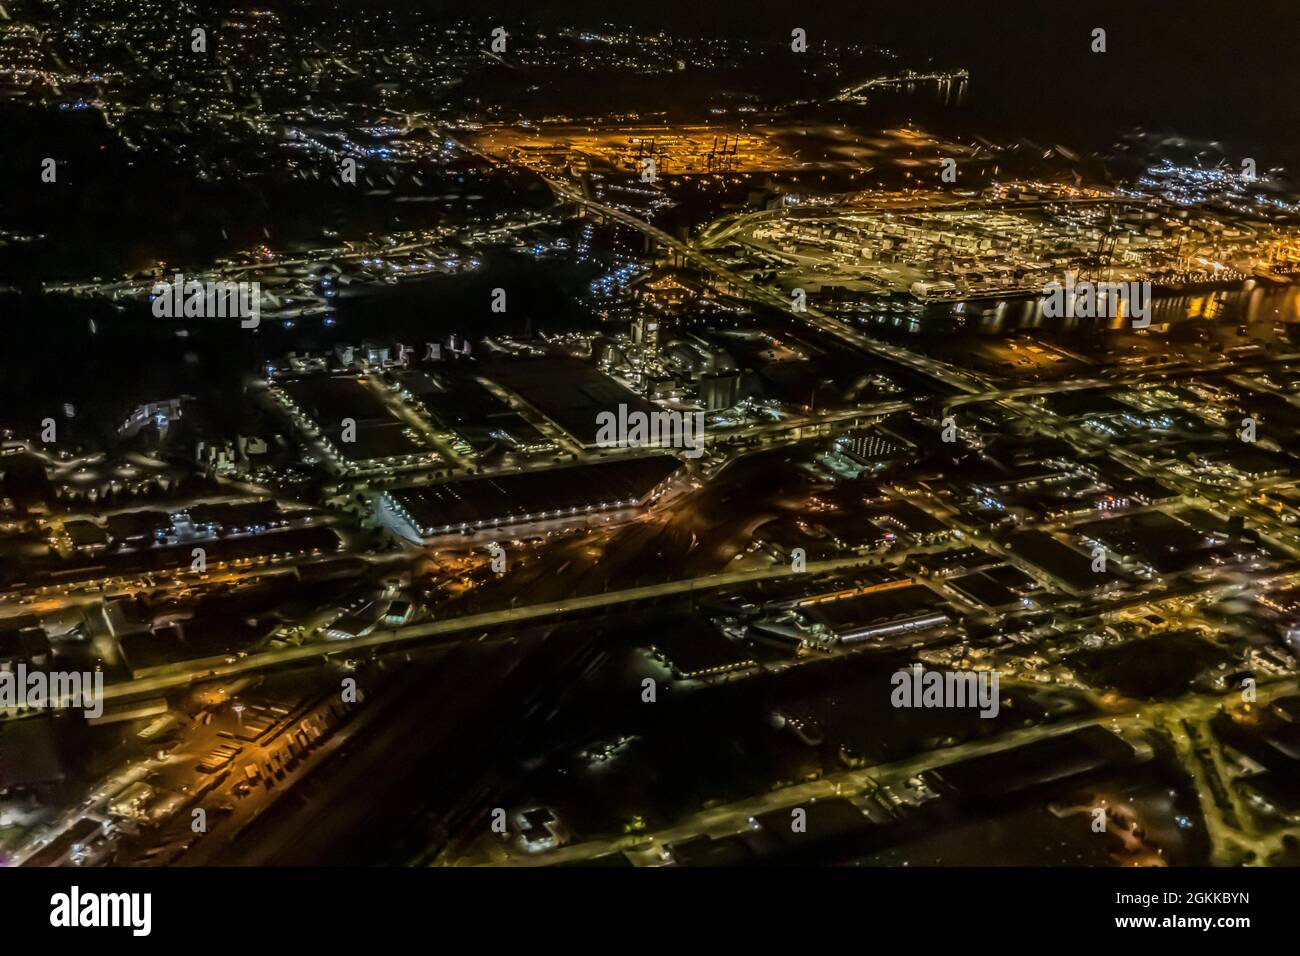 Arriving at night in the Puget Sound region after a flight from Minneapolis, Seattle area, Washinton State, USA Stock Photo